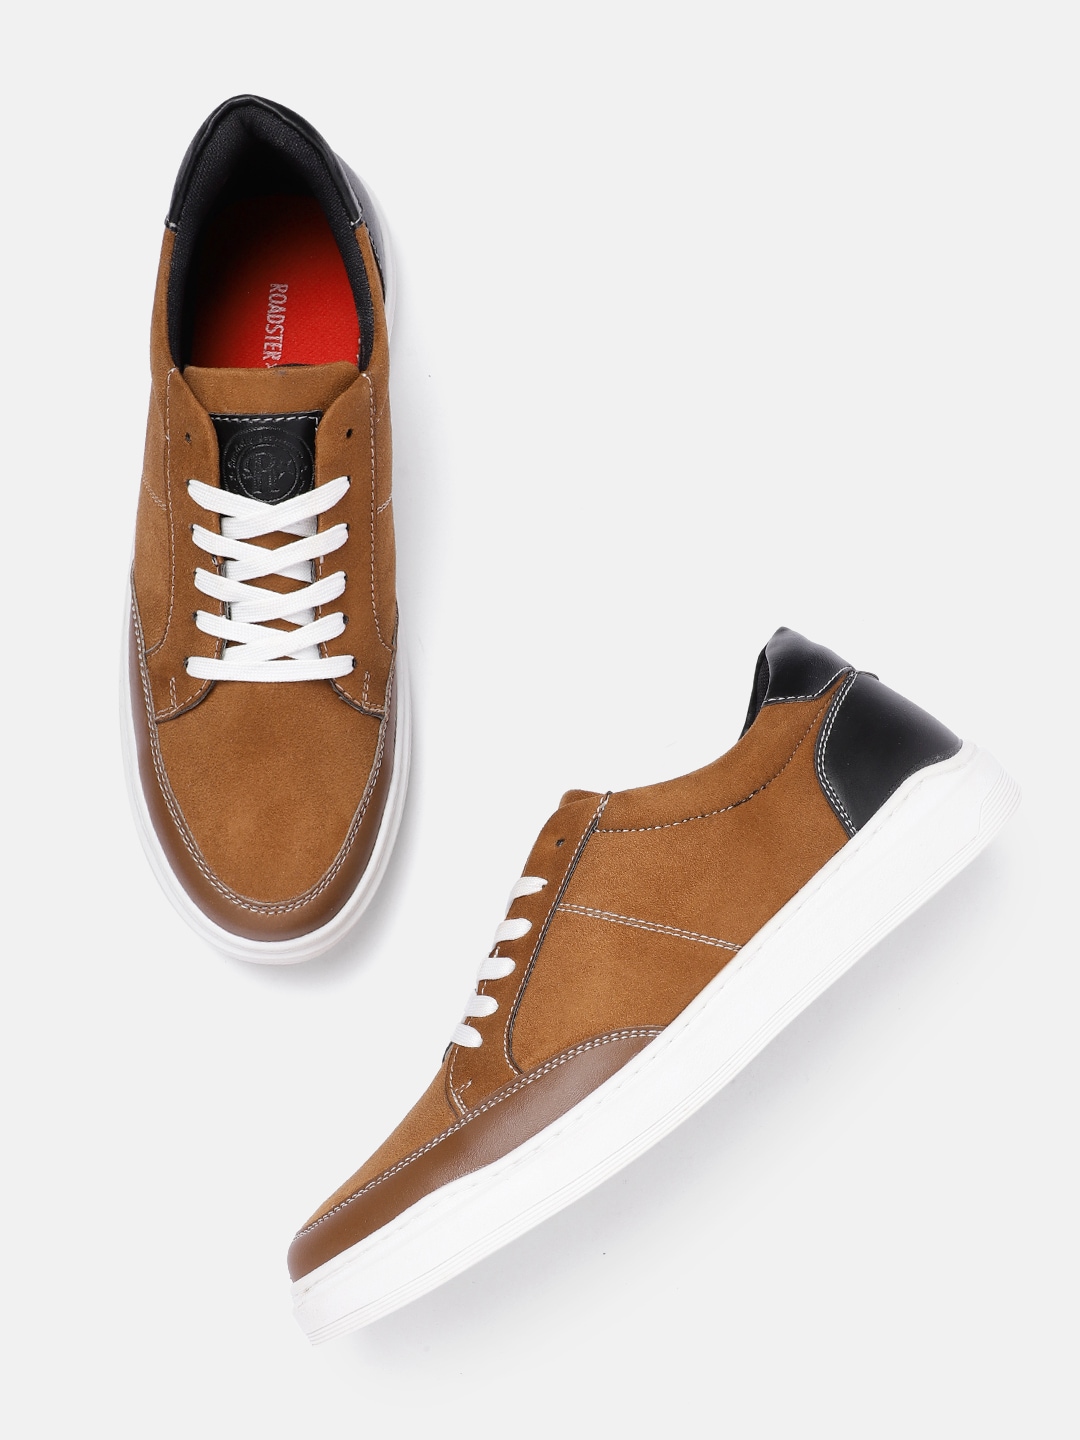 The Roadster Lifestyle Co. Men Contrast Sole Sneakers